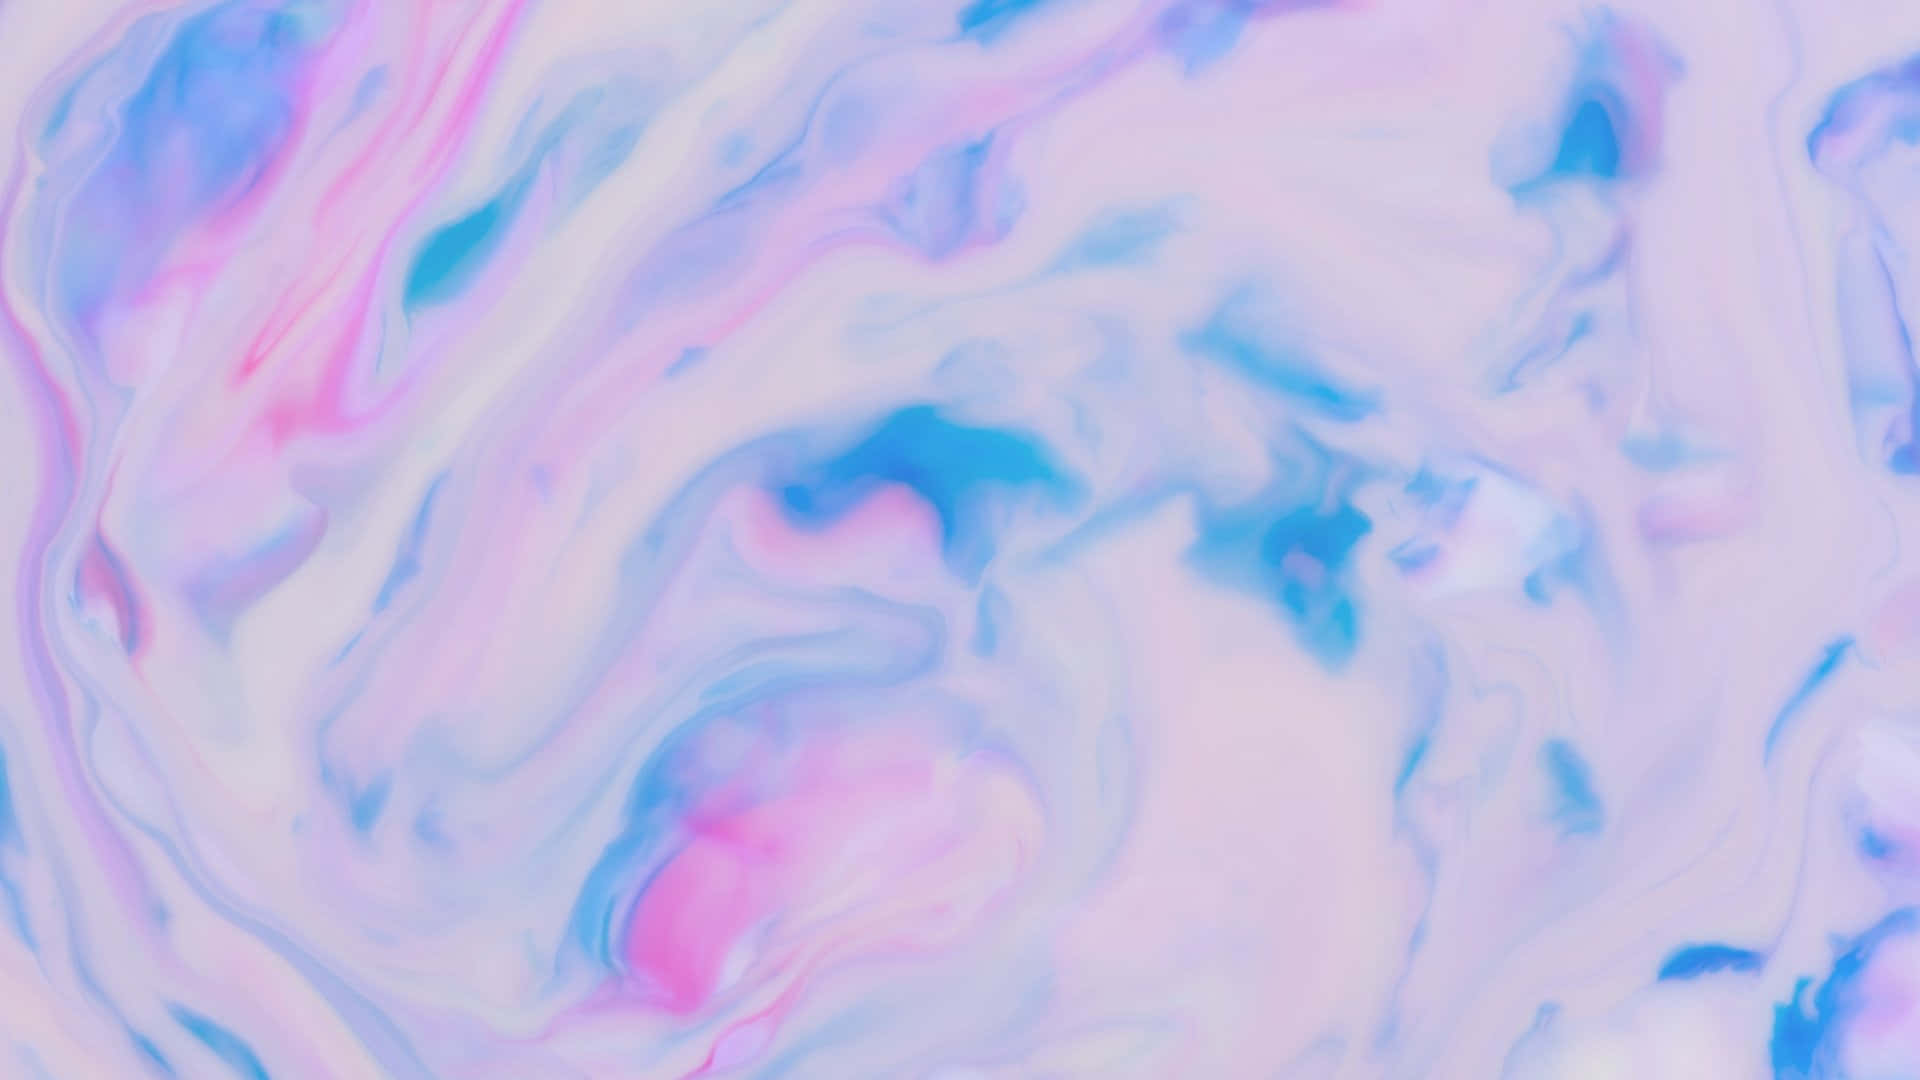 Download Fluid Abstract Art Banner Background | Wallpapers.com